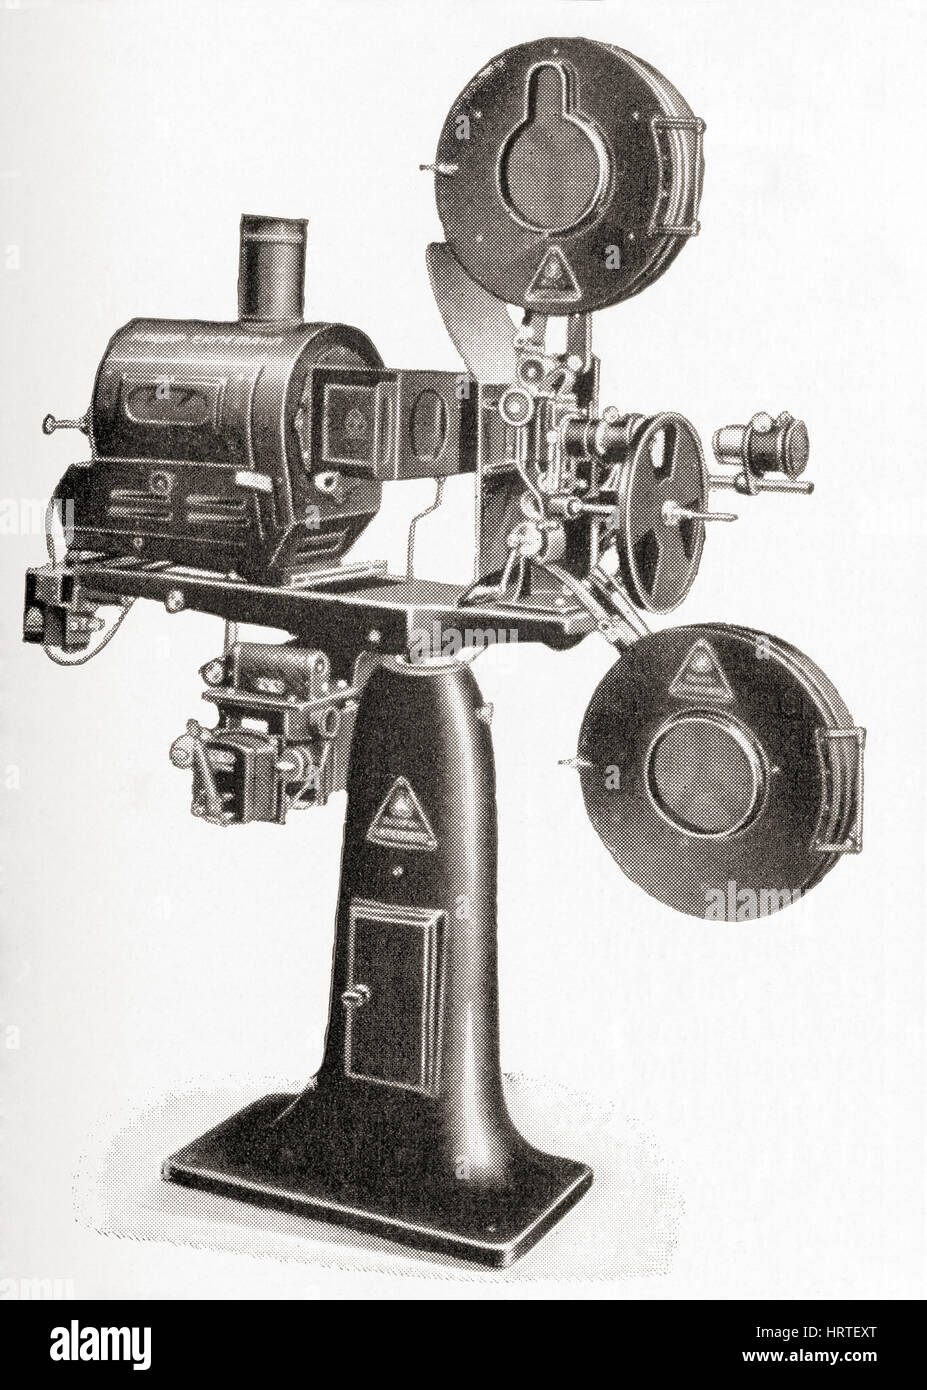 A Krupp-Ernemann Imperator, silent movie projector, c.1910.  From Meyers Lexicon, published 1927. Stock Photo